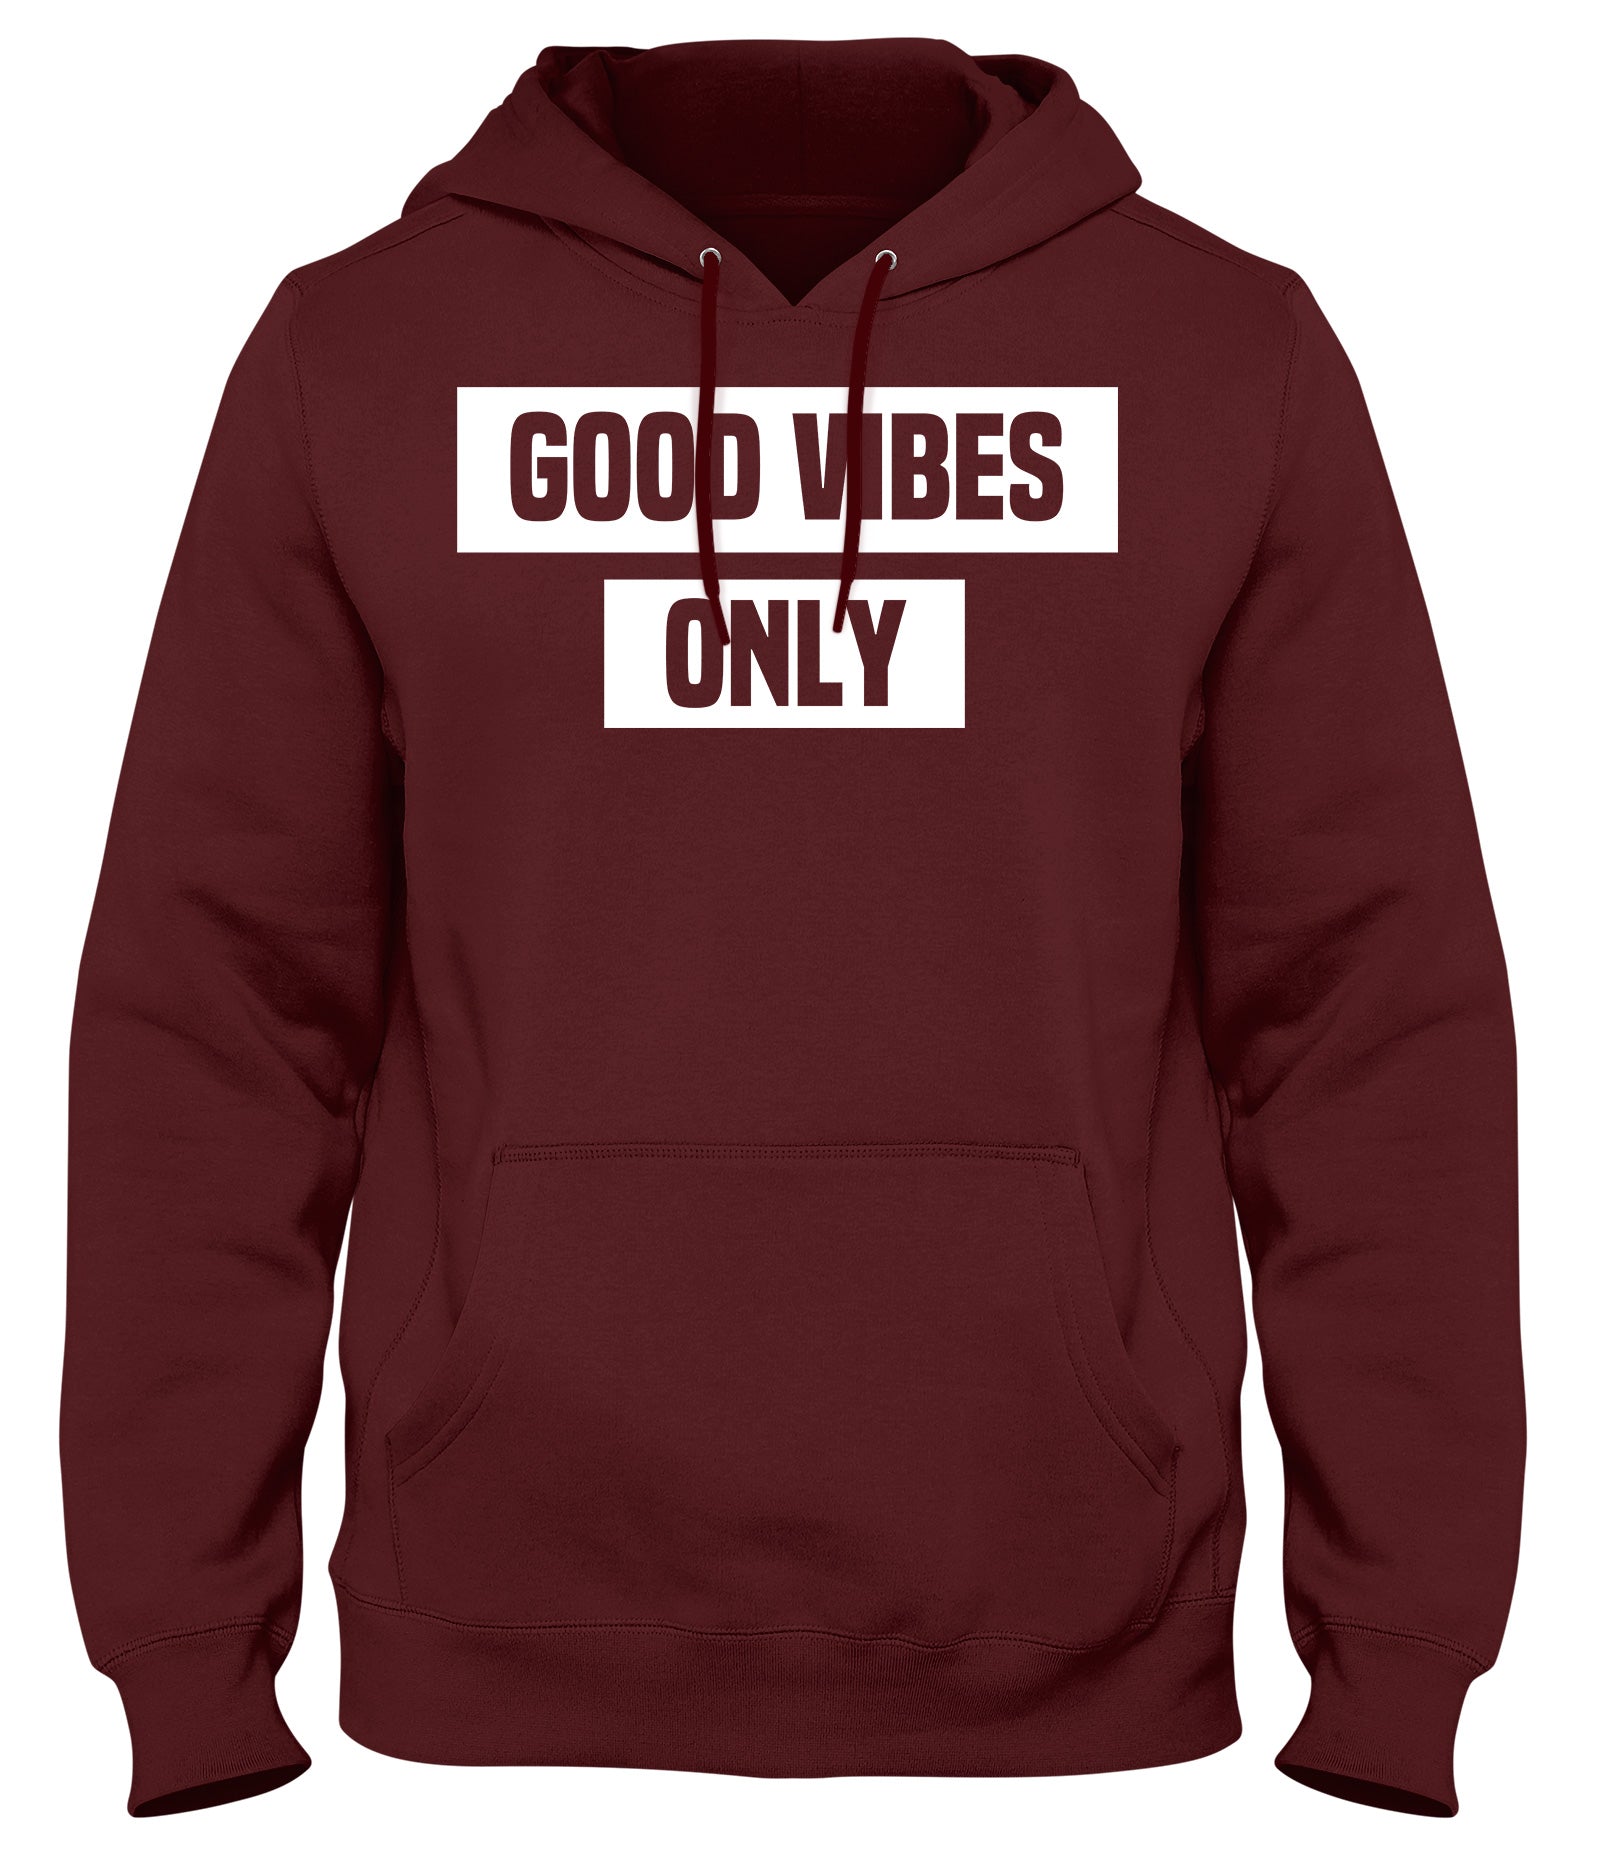 GOOD VIBES ONLY MENS WOMENS UNISEX FUNNY HOODIE